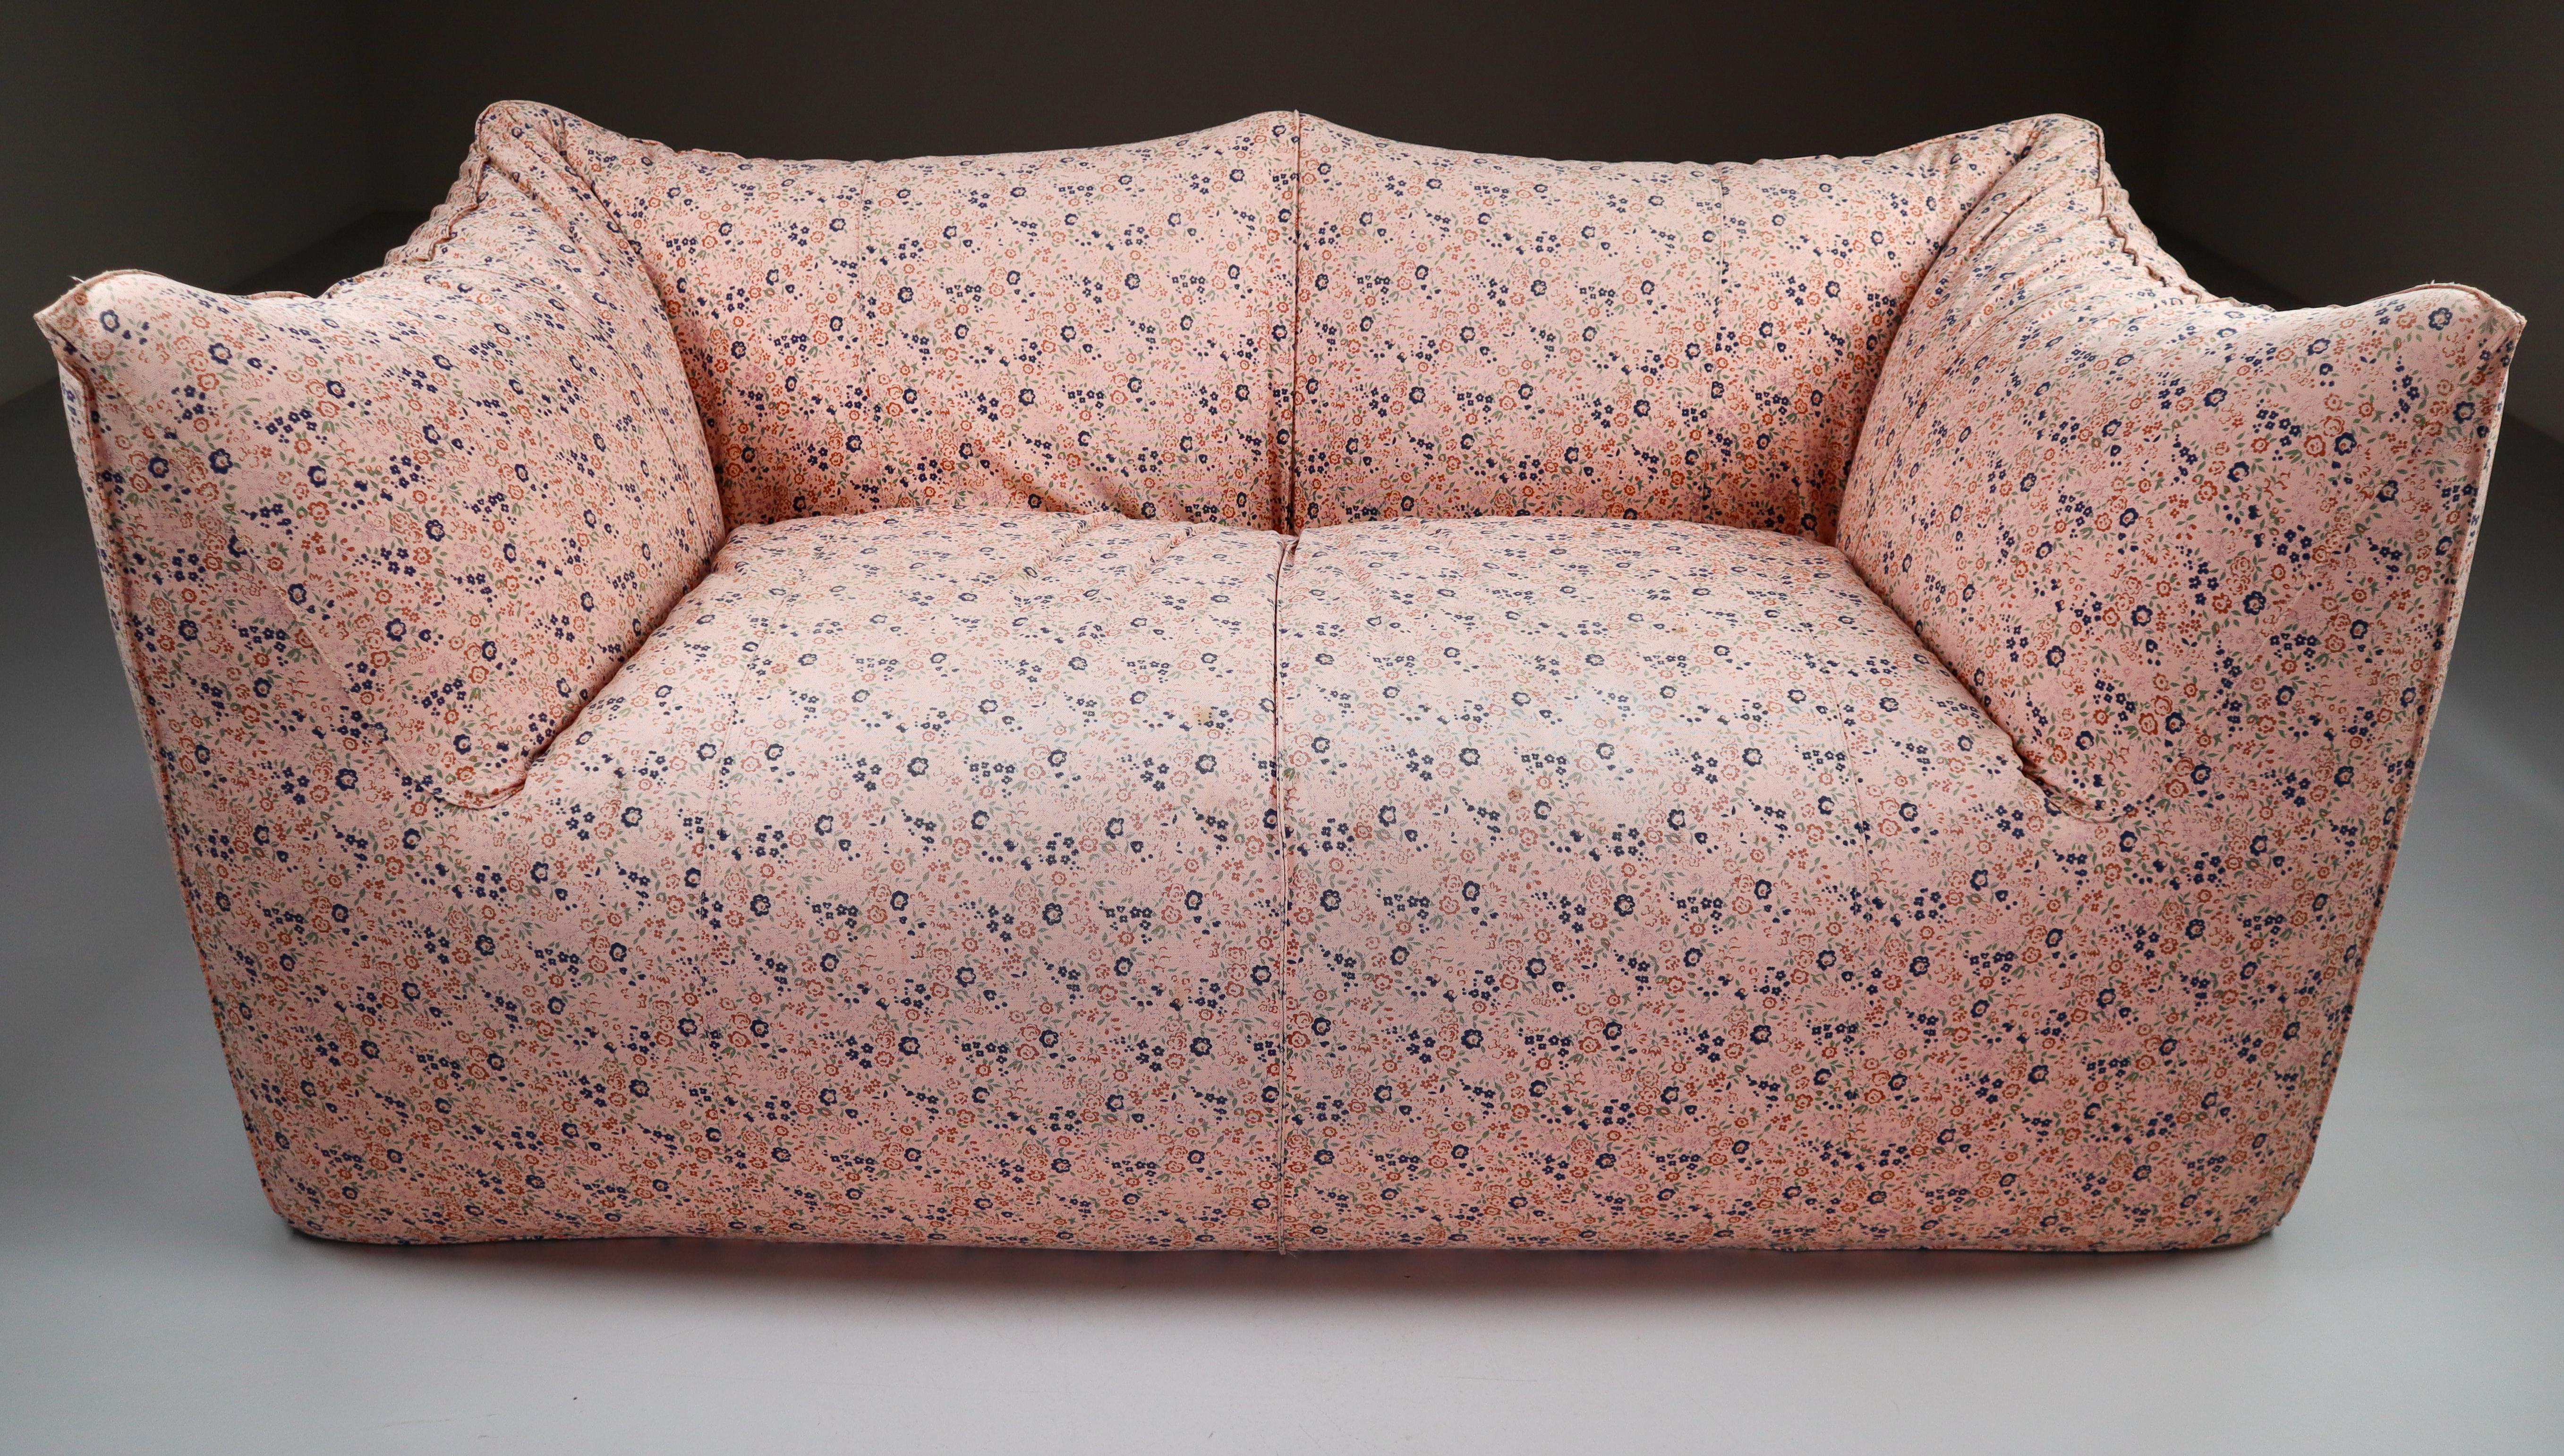 Original floral two-seat sofa “Le Bambole” by Mario Bellini for B & B Italia. Manufactured in Italy during the 1970s. Really comfortable sofa in original floral fabric. Almost 50 years old, but the sofa remains in good condition with minor traces of